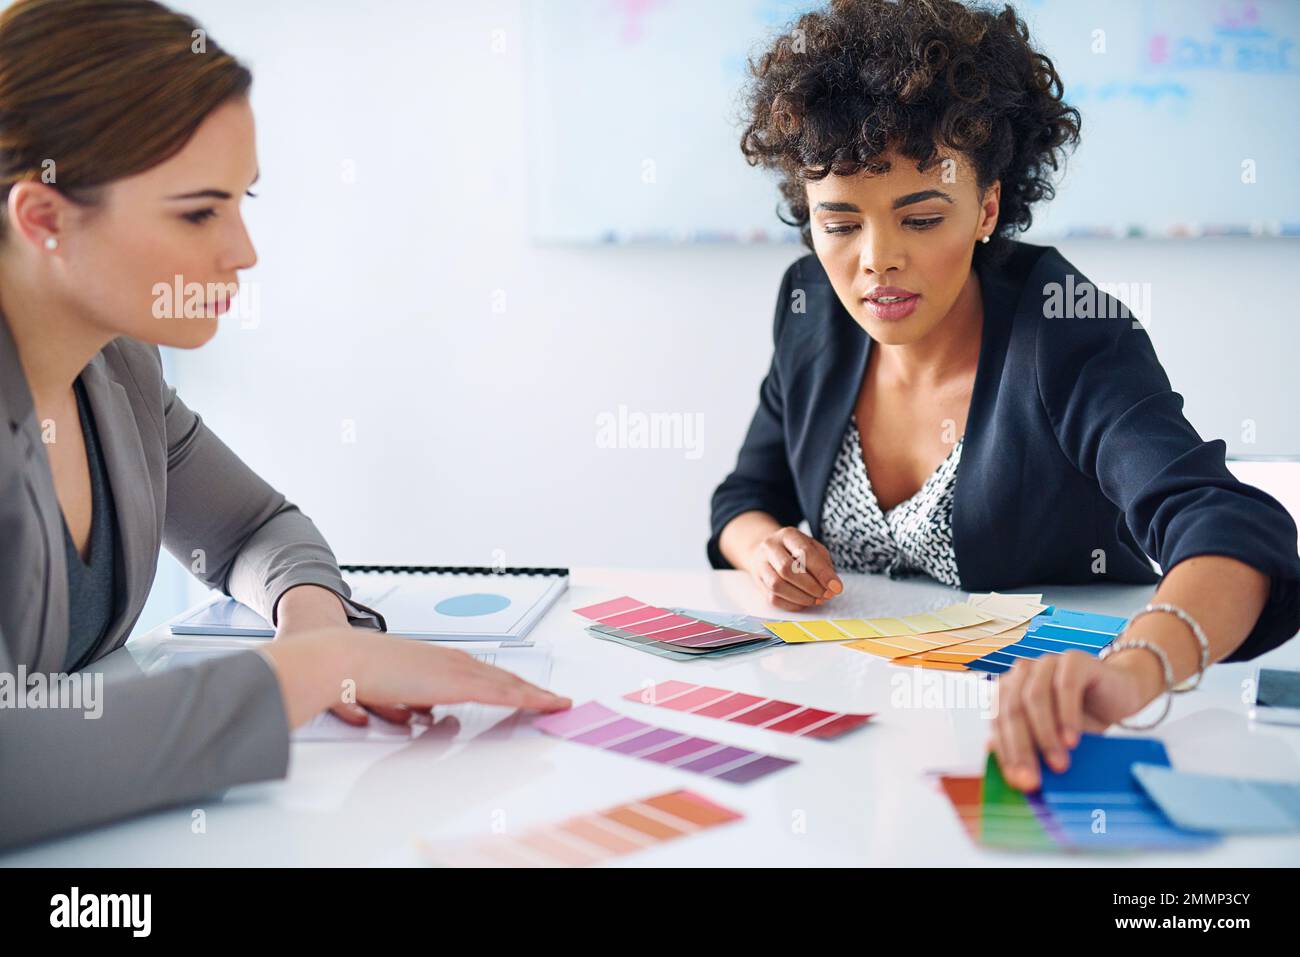 Creating a professional color scheme for their brand. two designers looking at color swatches. Stock Photo